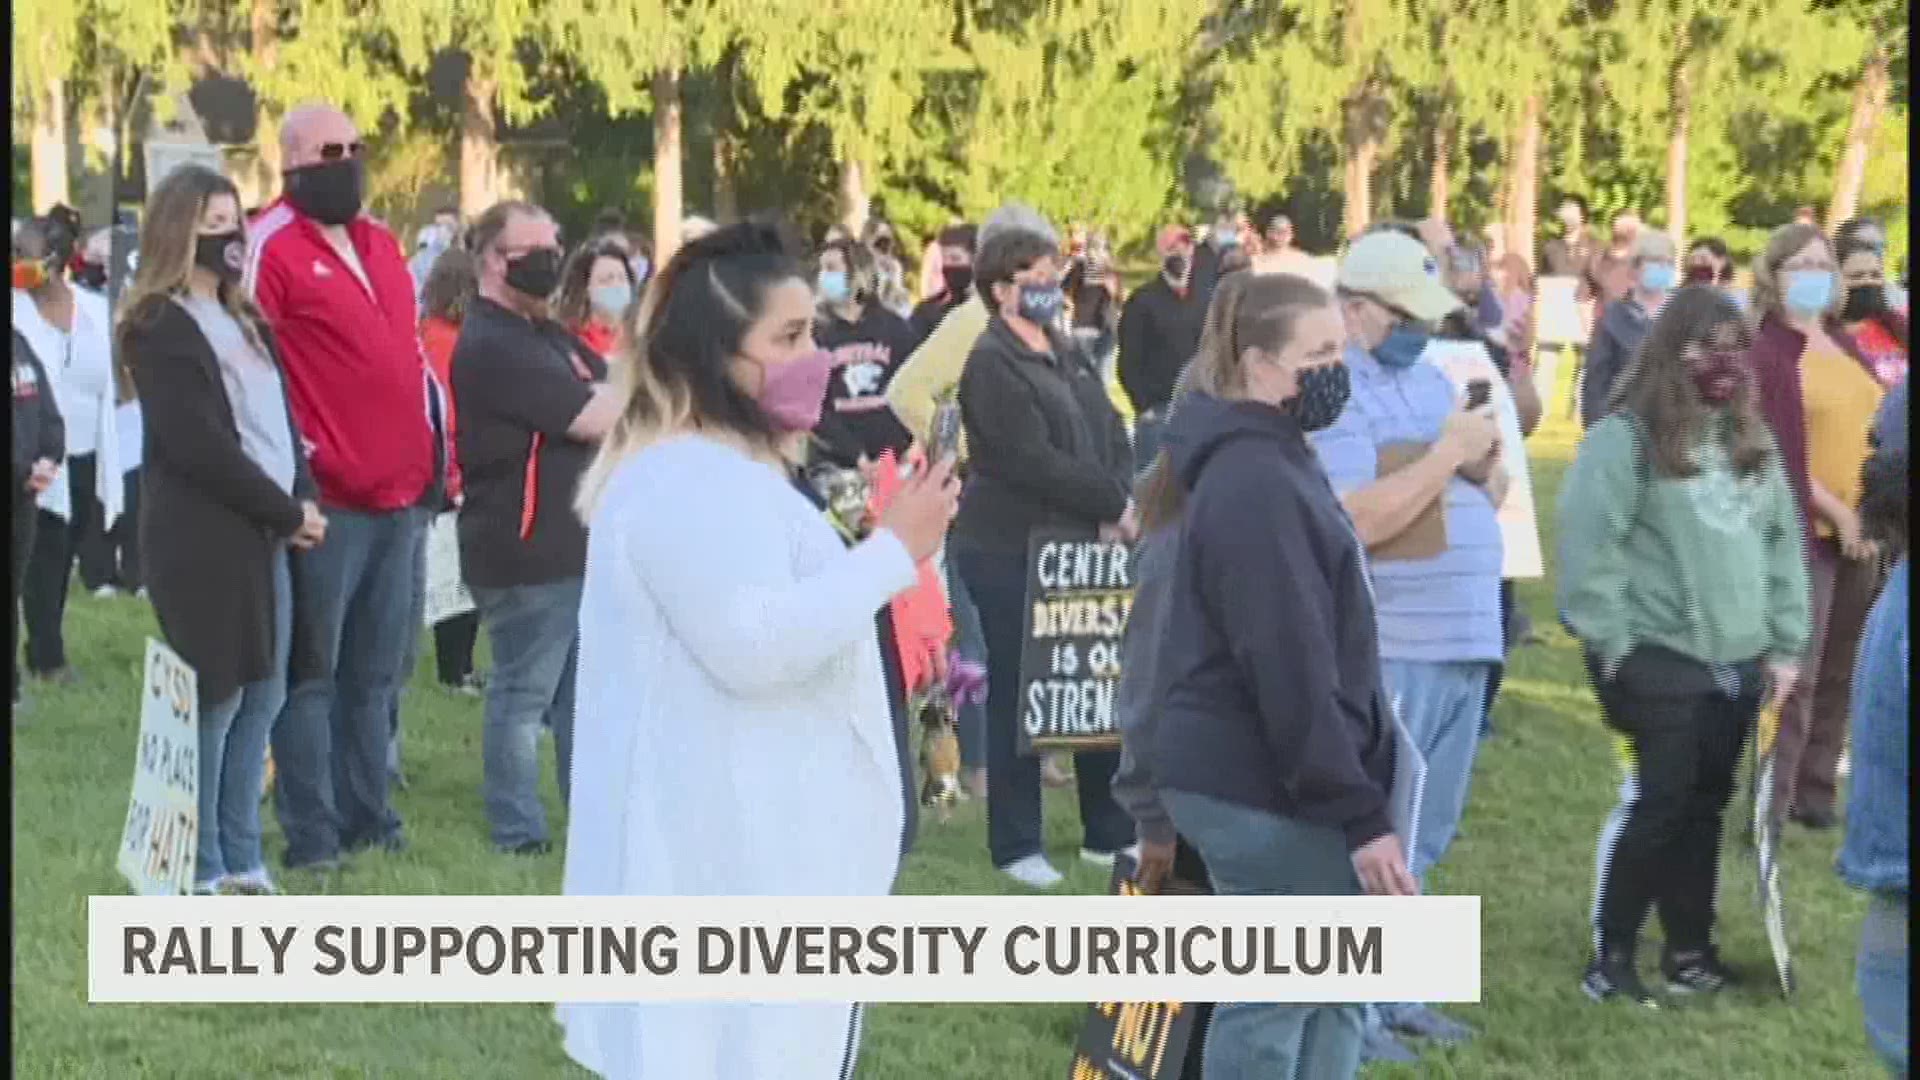 A community rally drew more than 100 people to protest Central York School District’s decision to table a proposed curriculum that would address racism.